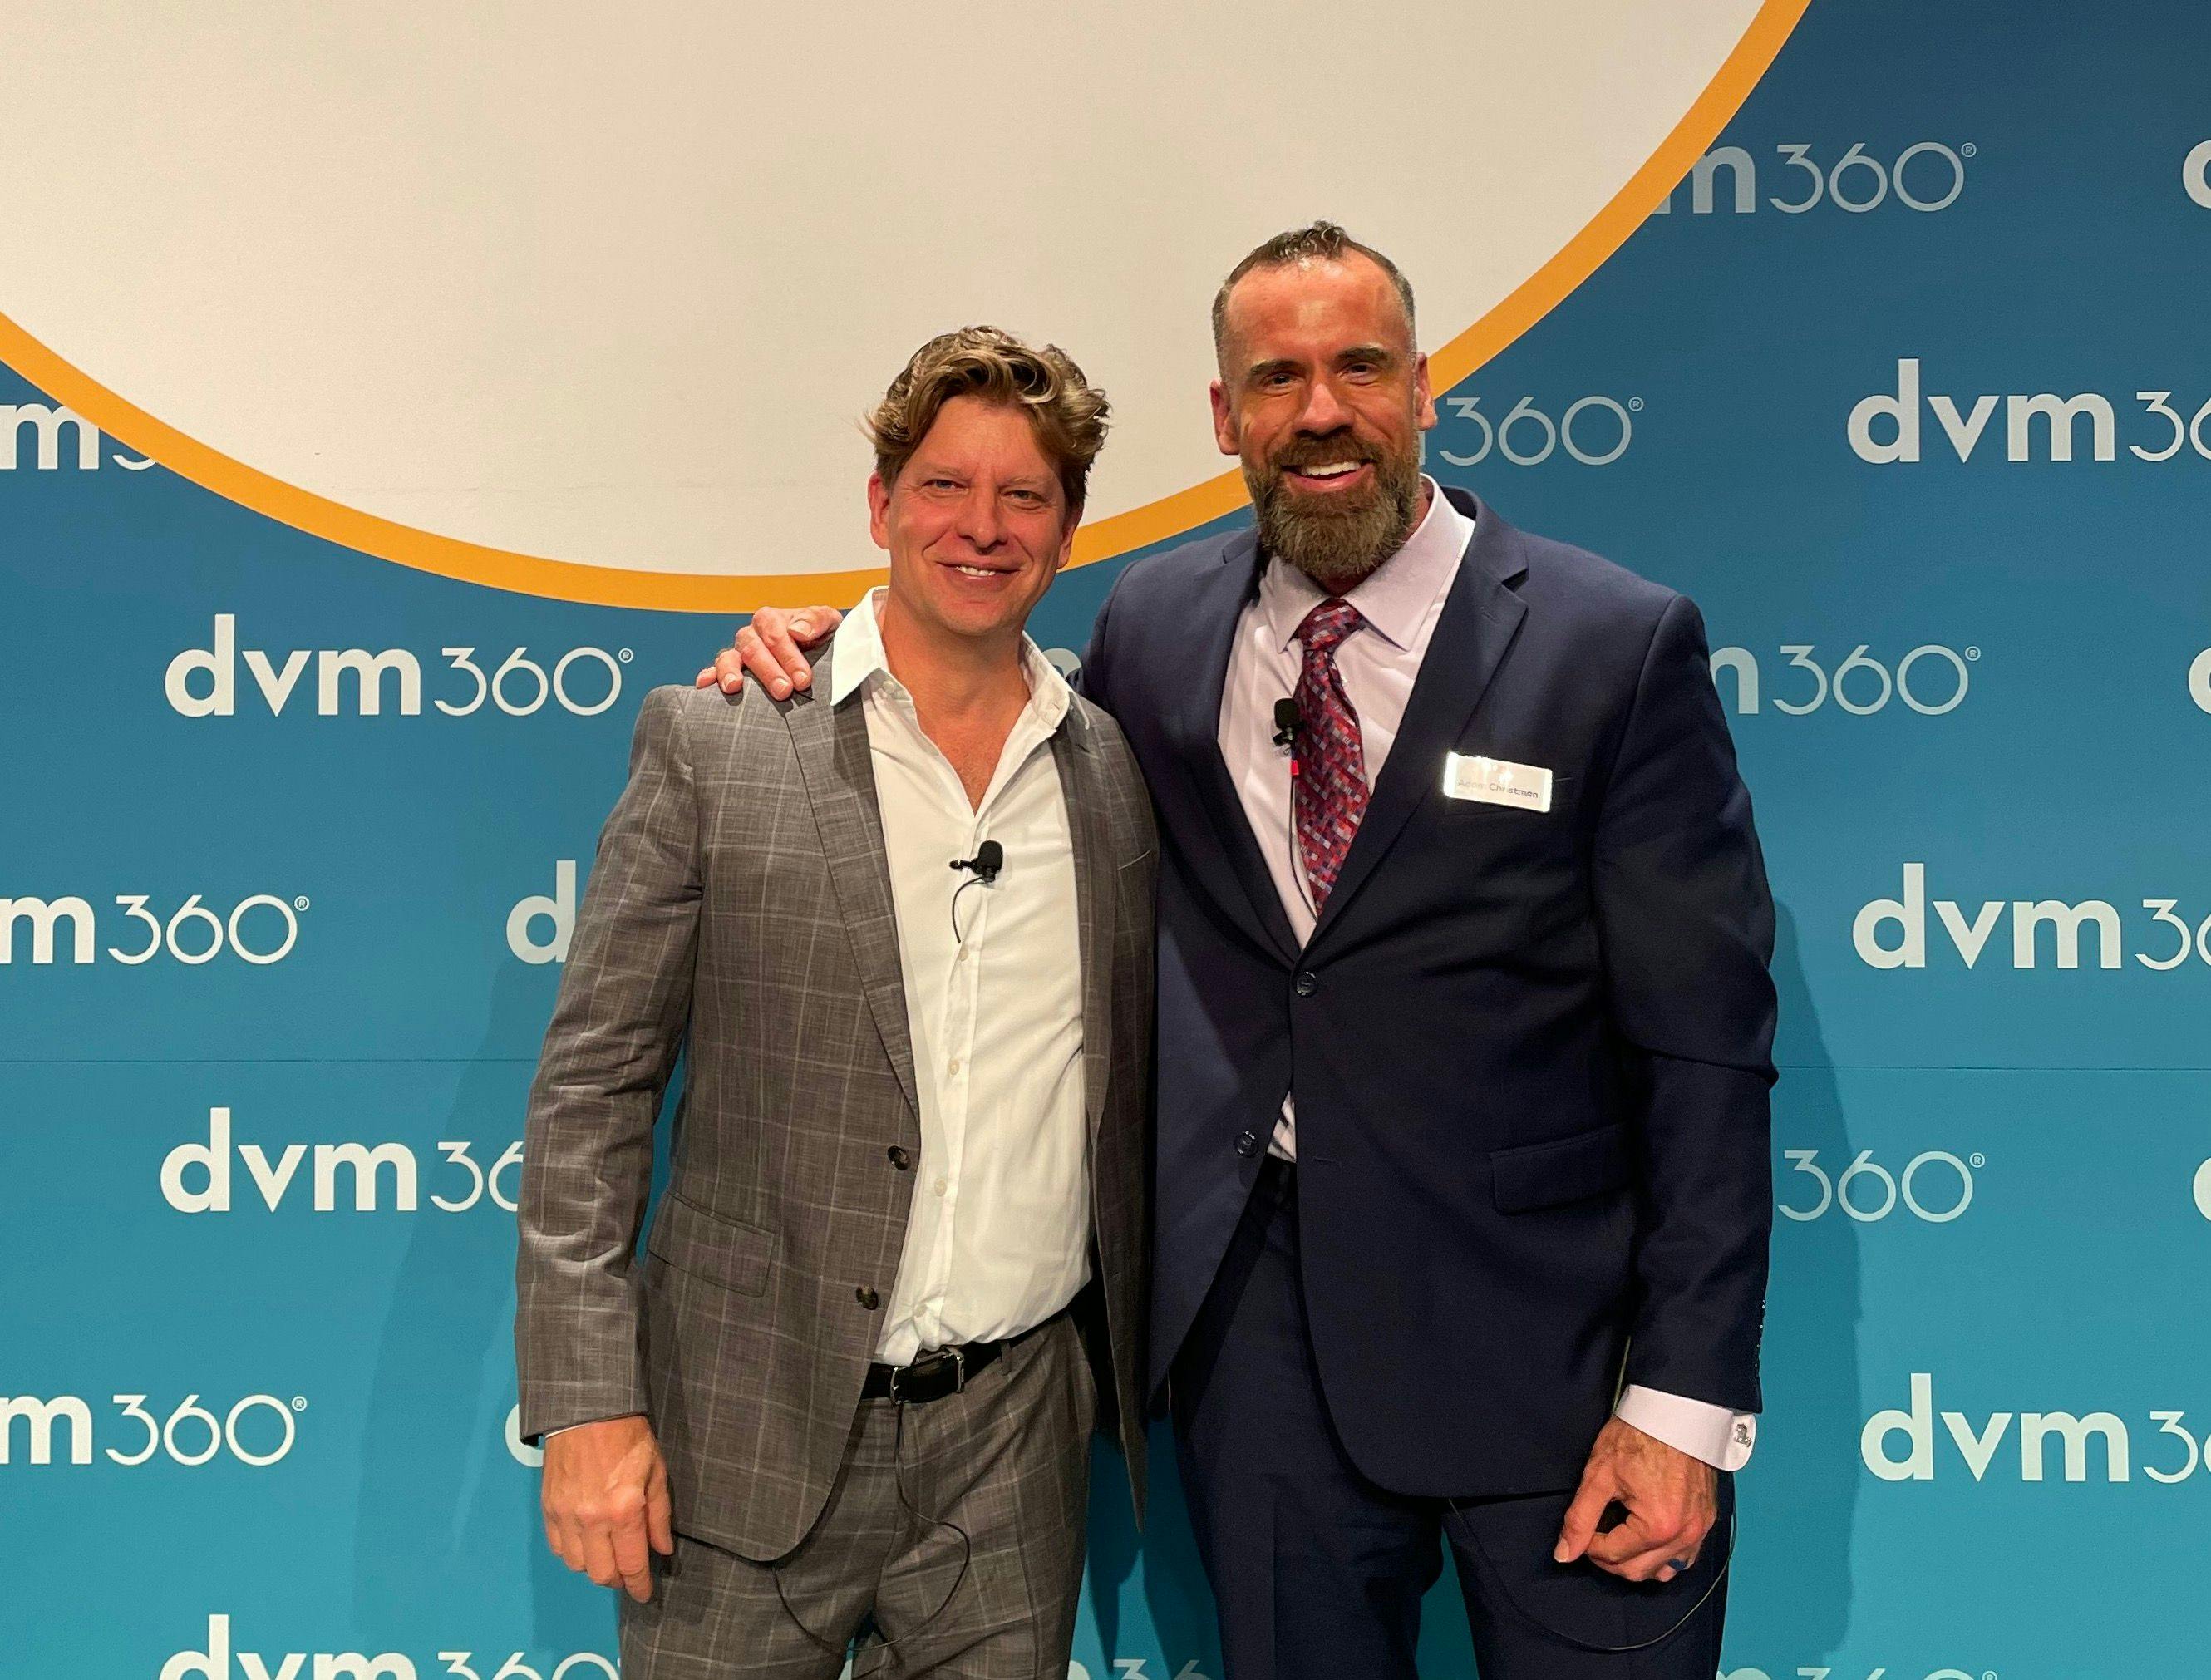 Keynote speaker Bash Halow, LVT, CVPM (left), alongside our Chief Veterinary Officer, Adam Christman, DVM, MBA (right) in Charlotte, North Carolina at the Fetch dvm360® conference.